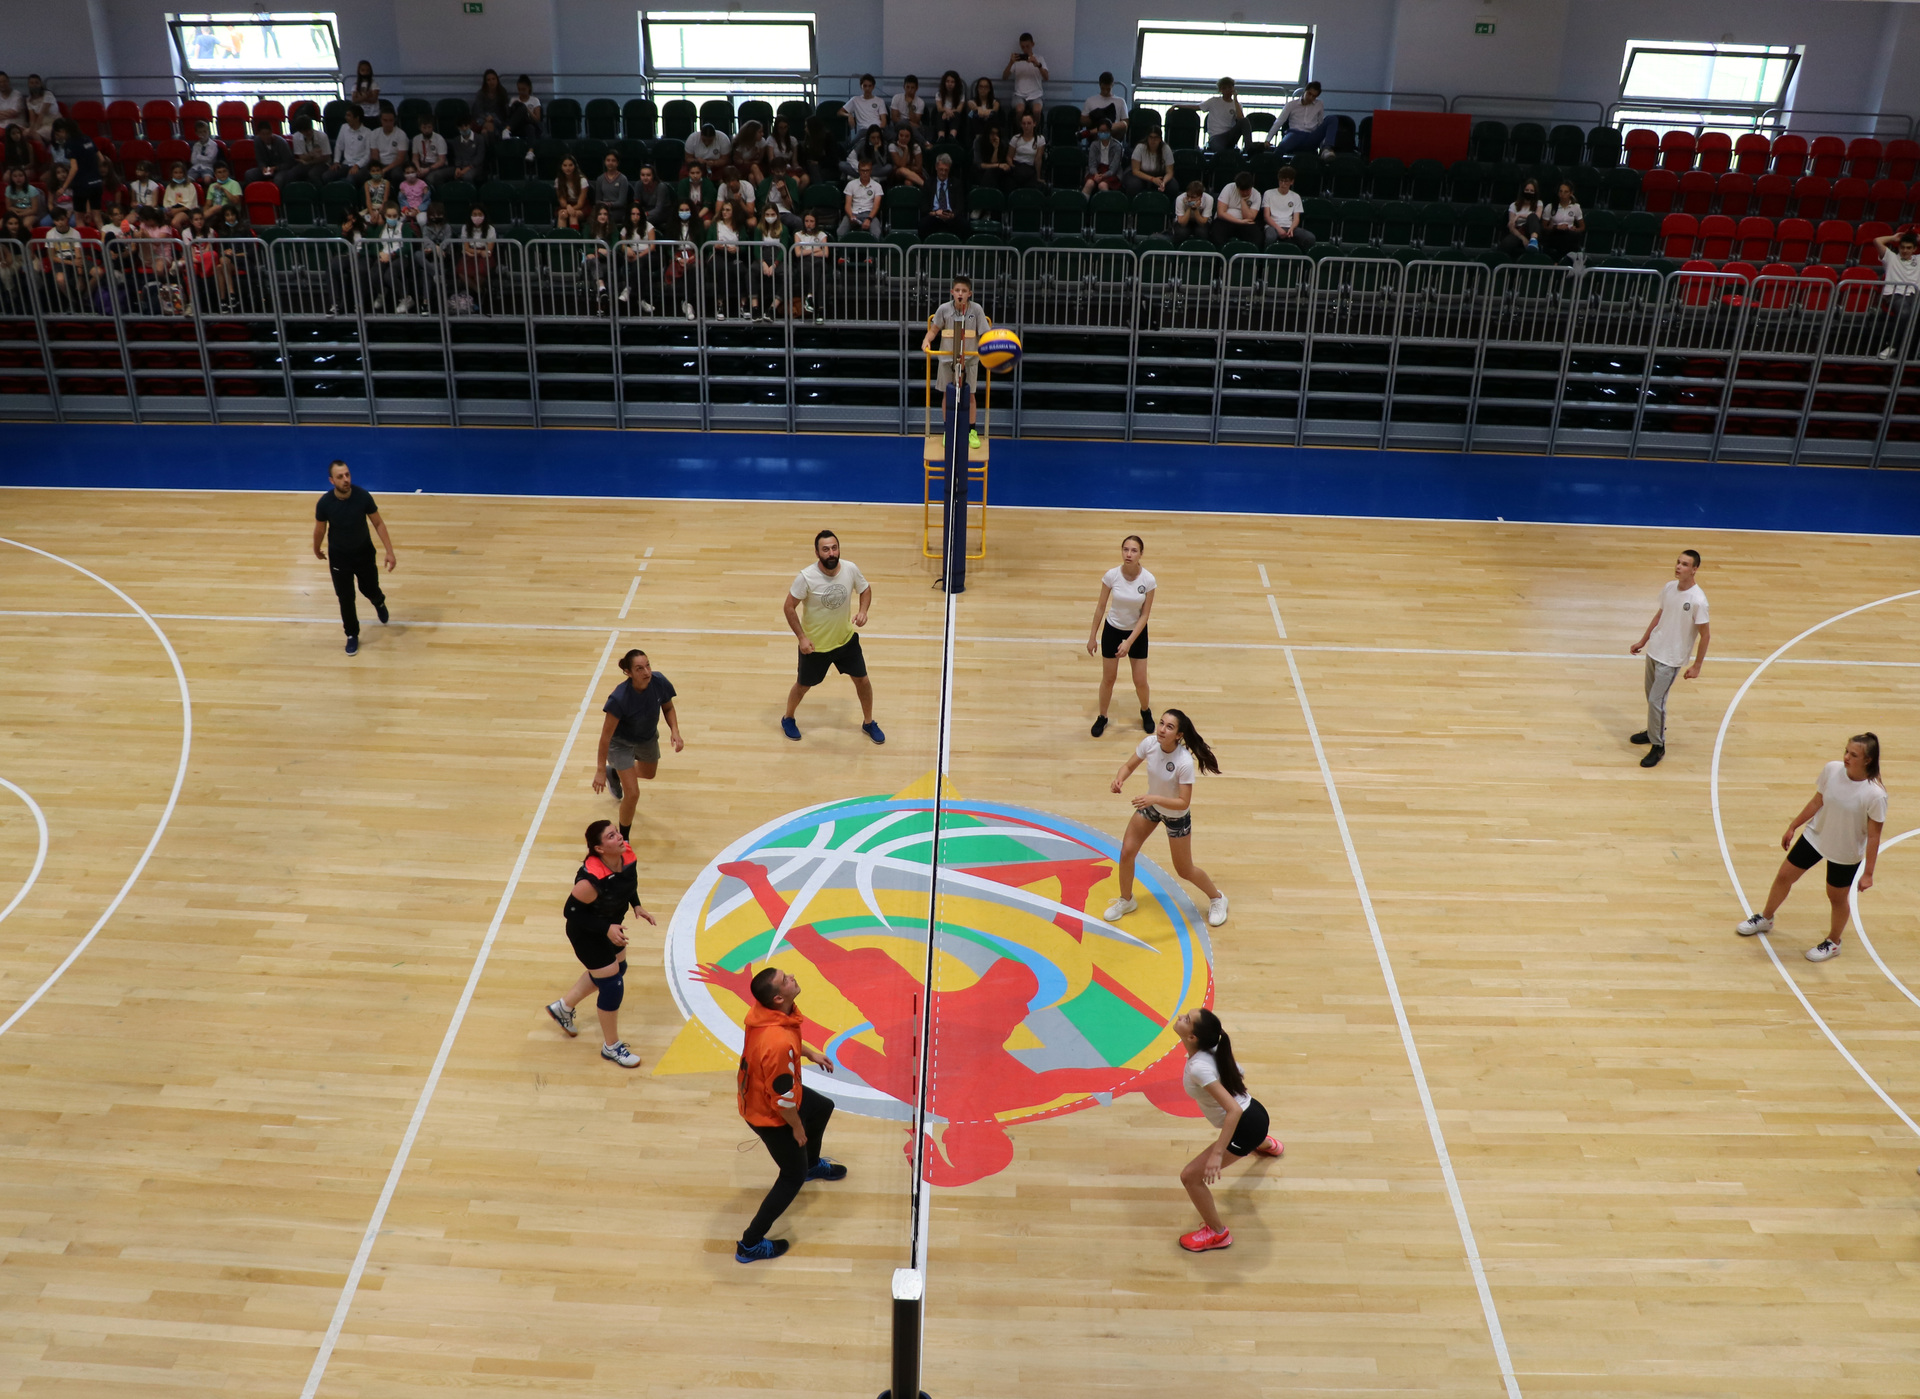 Teachers vs. Students in a Volleyball Sports Game